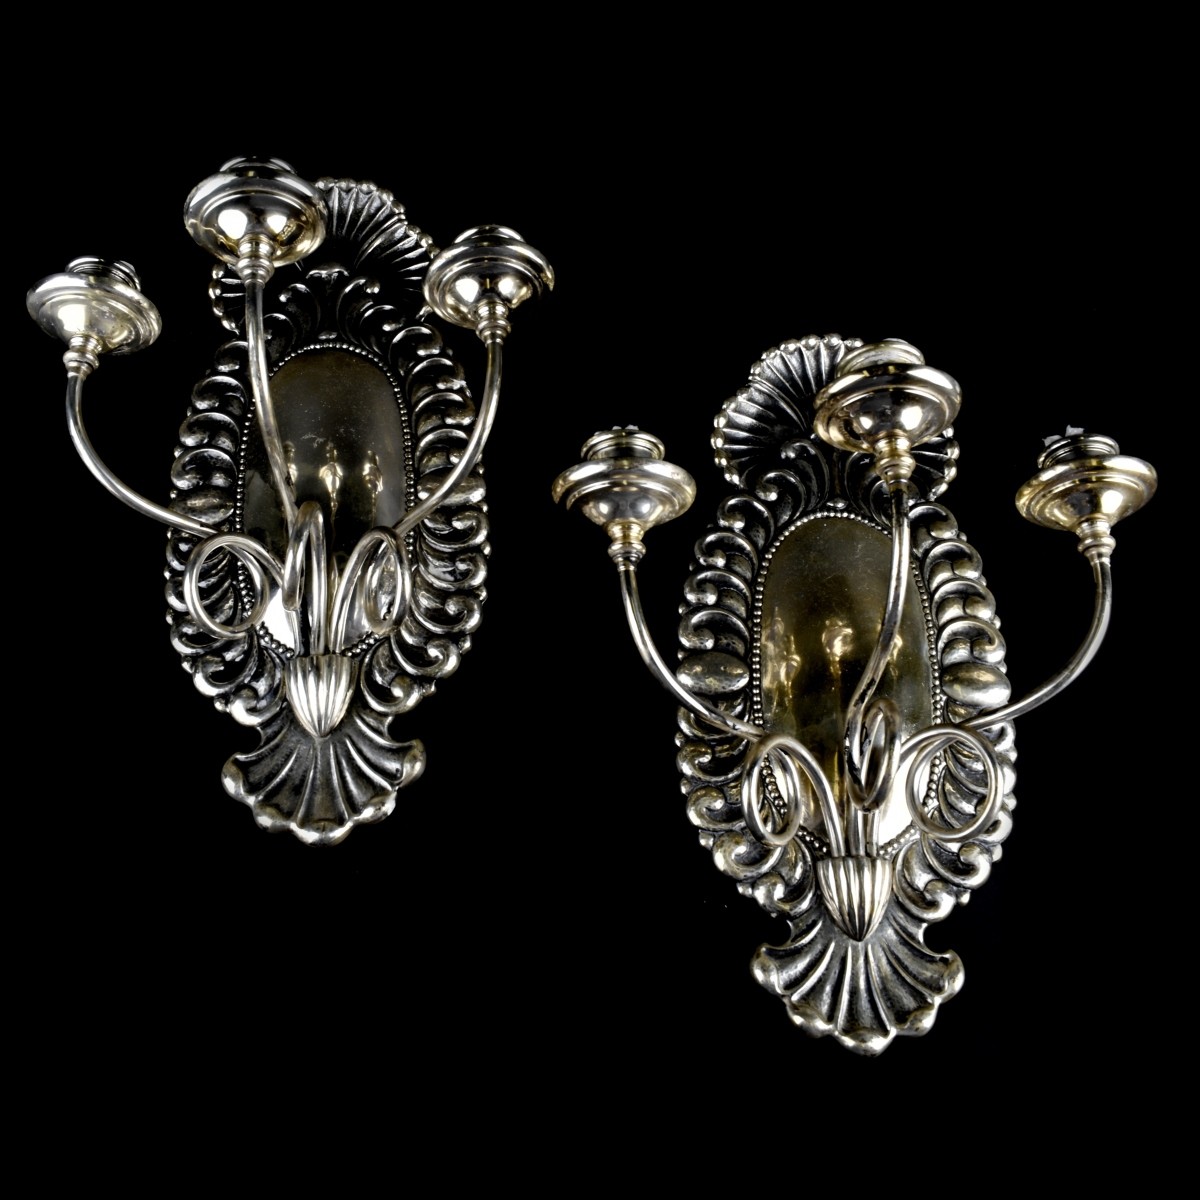 Pair of Neoclassical Style Sconces